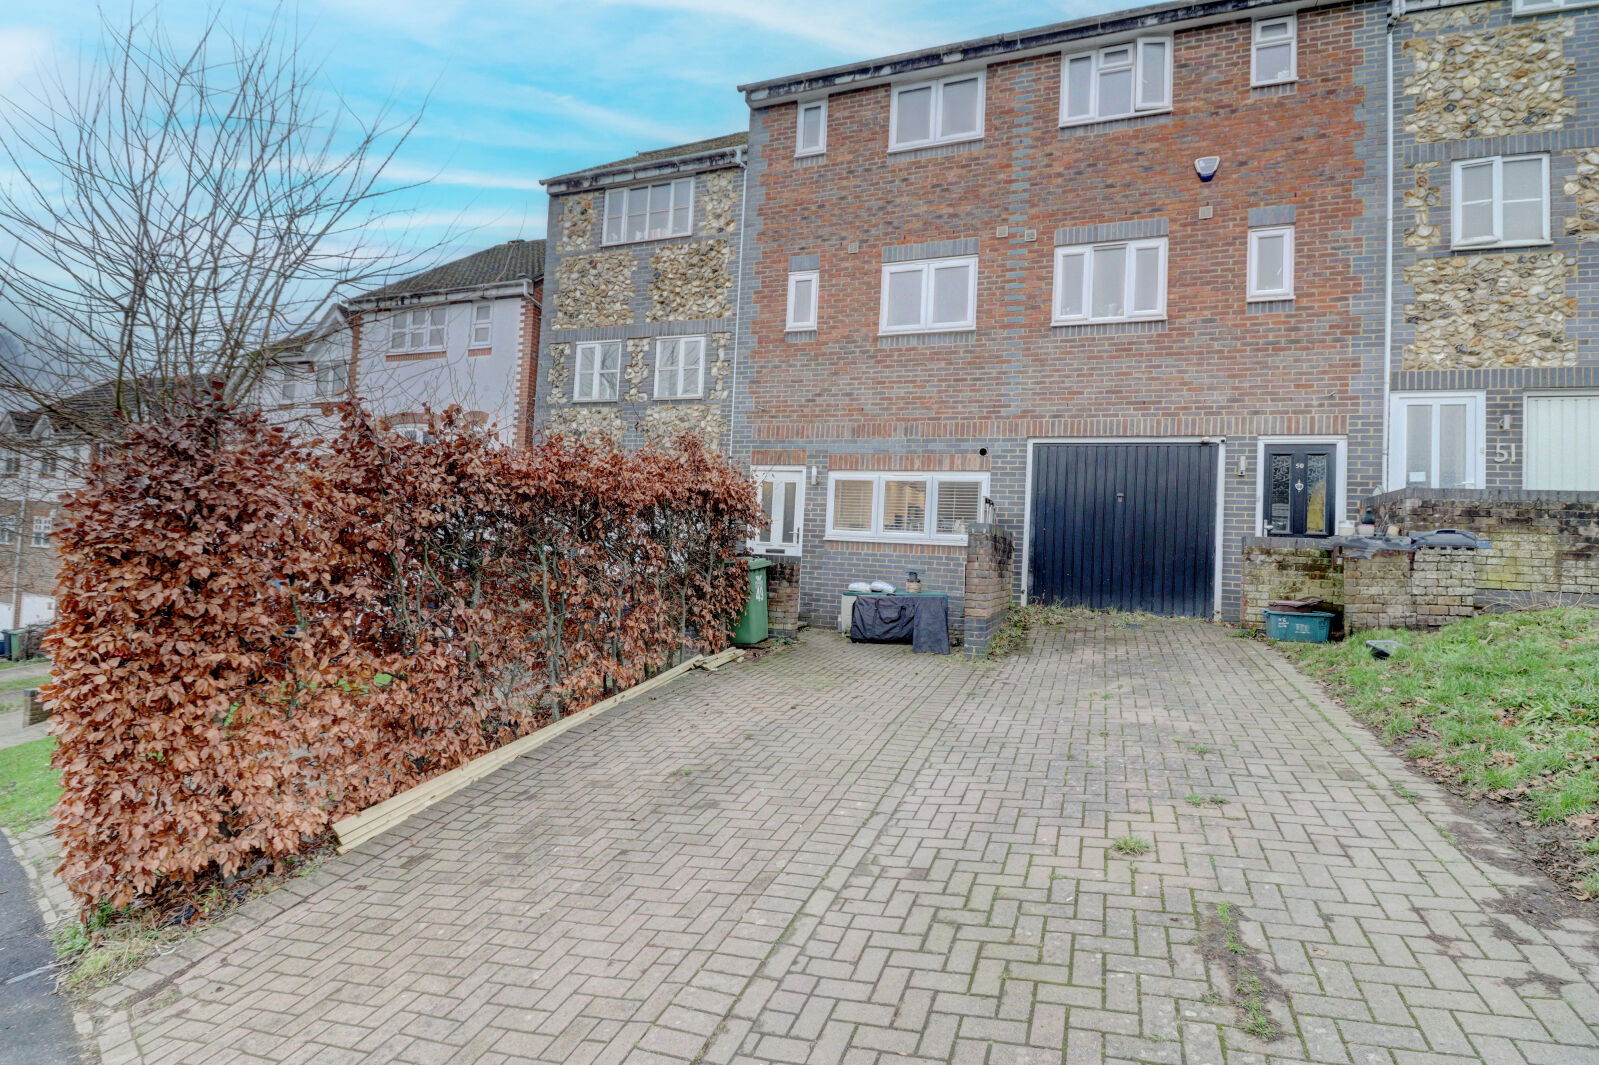 3 bedroom mid terraced house for sale Wheelers Park, High Wycombe, HP13, main image